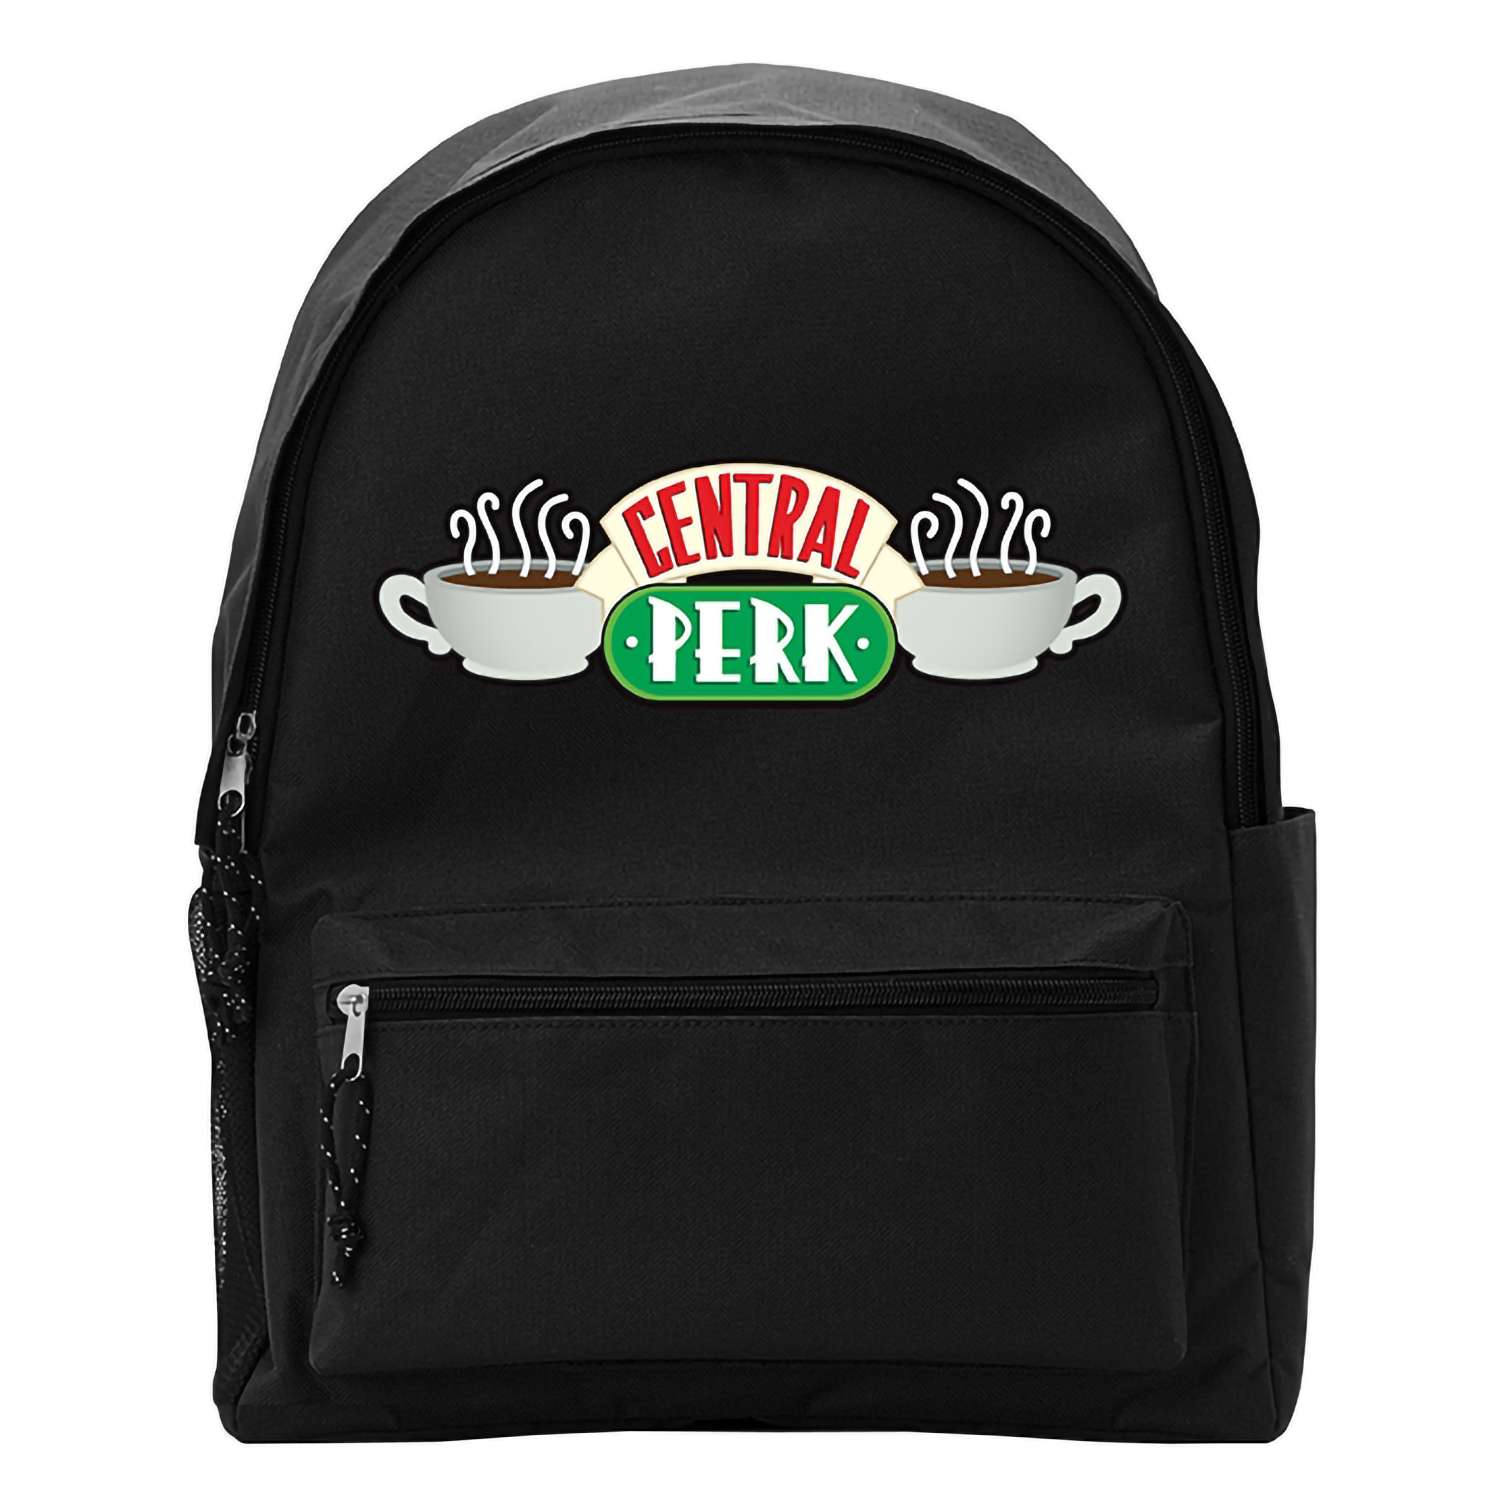 Рюкзак ABYStyle Friends Backpack Central Perk ABYBAG452 - фото 1